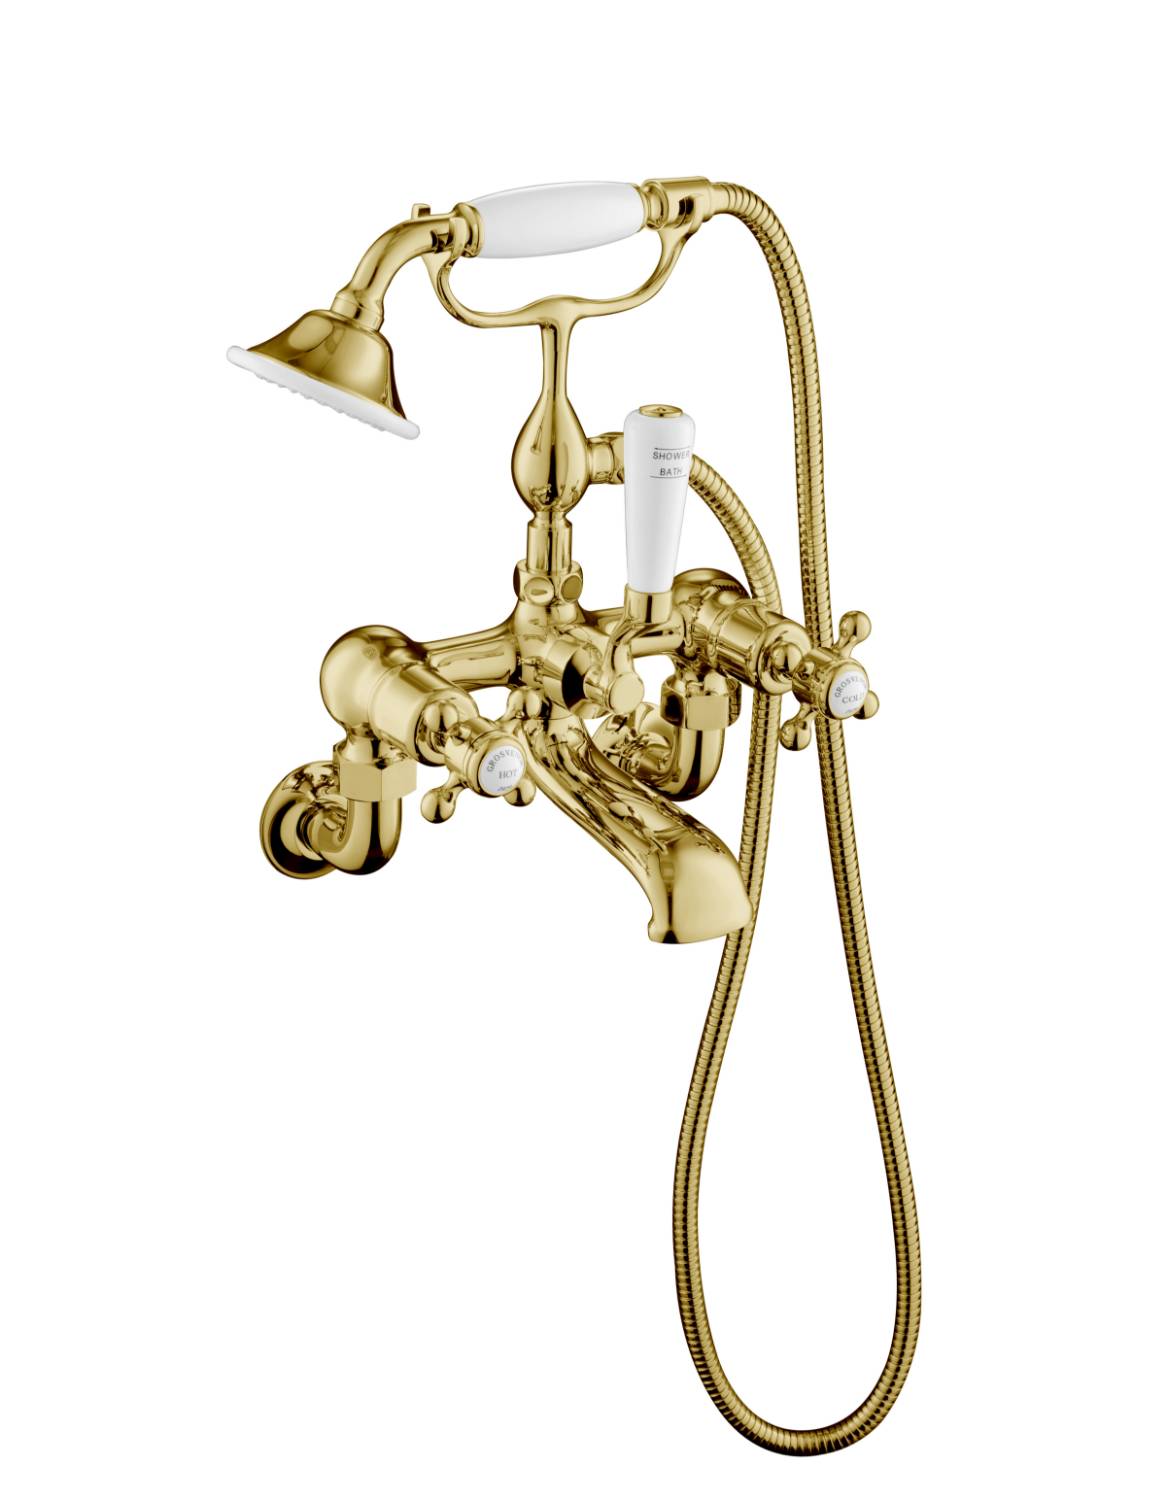 Grosvenor Bath Shower Mixer Wall Mounted With Kit - Bath Mixer Tap With Hand Shower